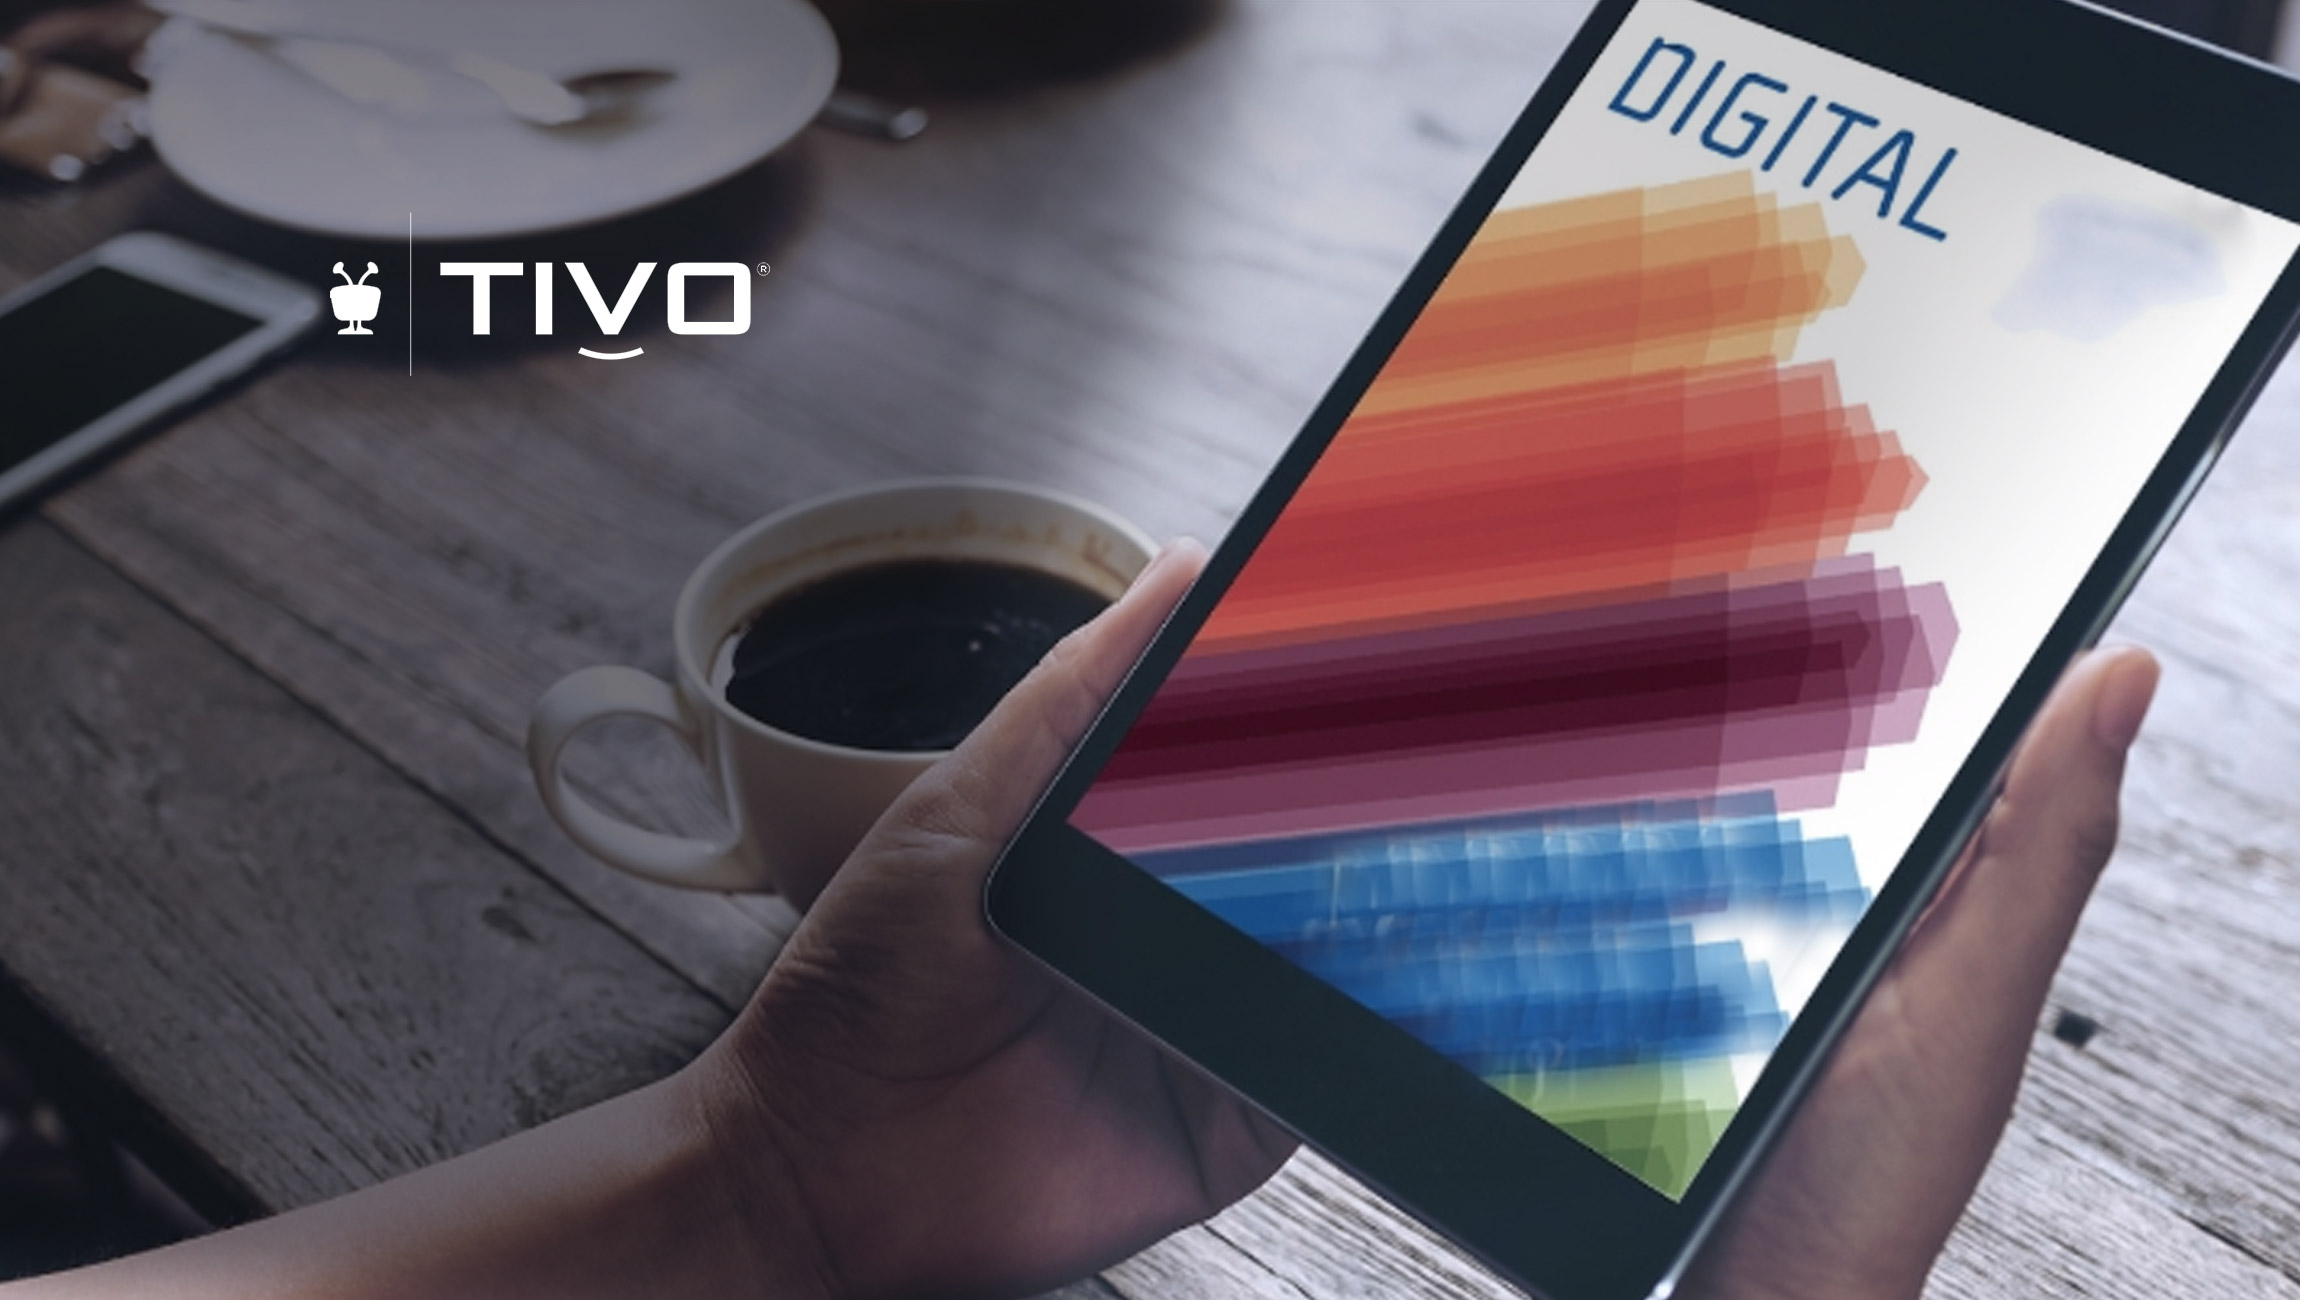 TiVo Integrates Demographic Attributes, Ad Airings, and Mobile Devices into TV Viewership Data Product, Helping Connect the Media and Advertising Industries to Viewers